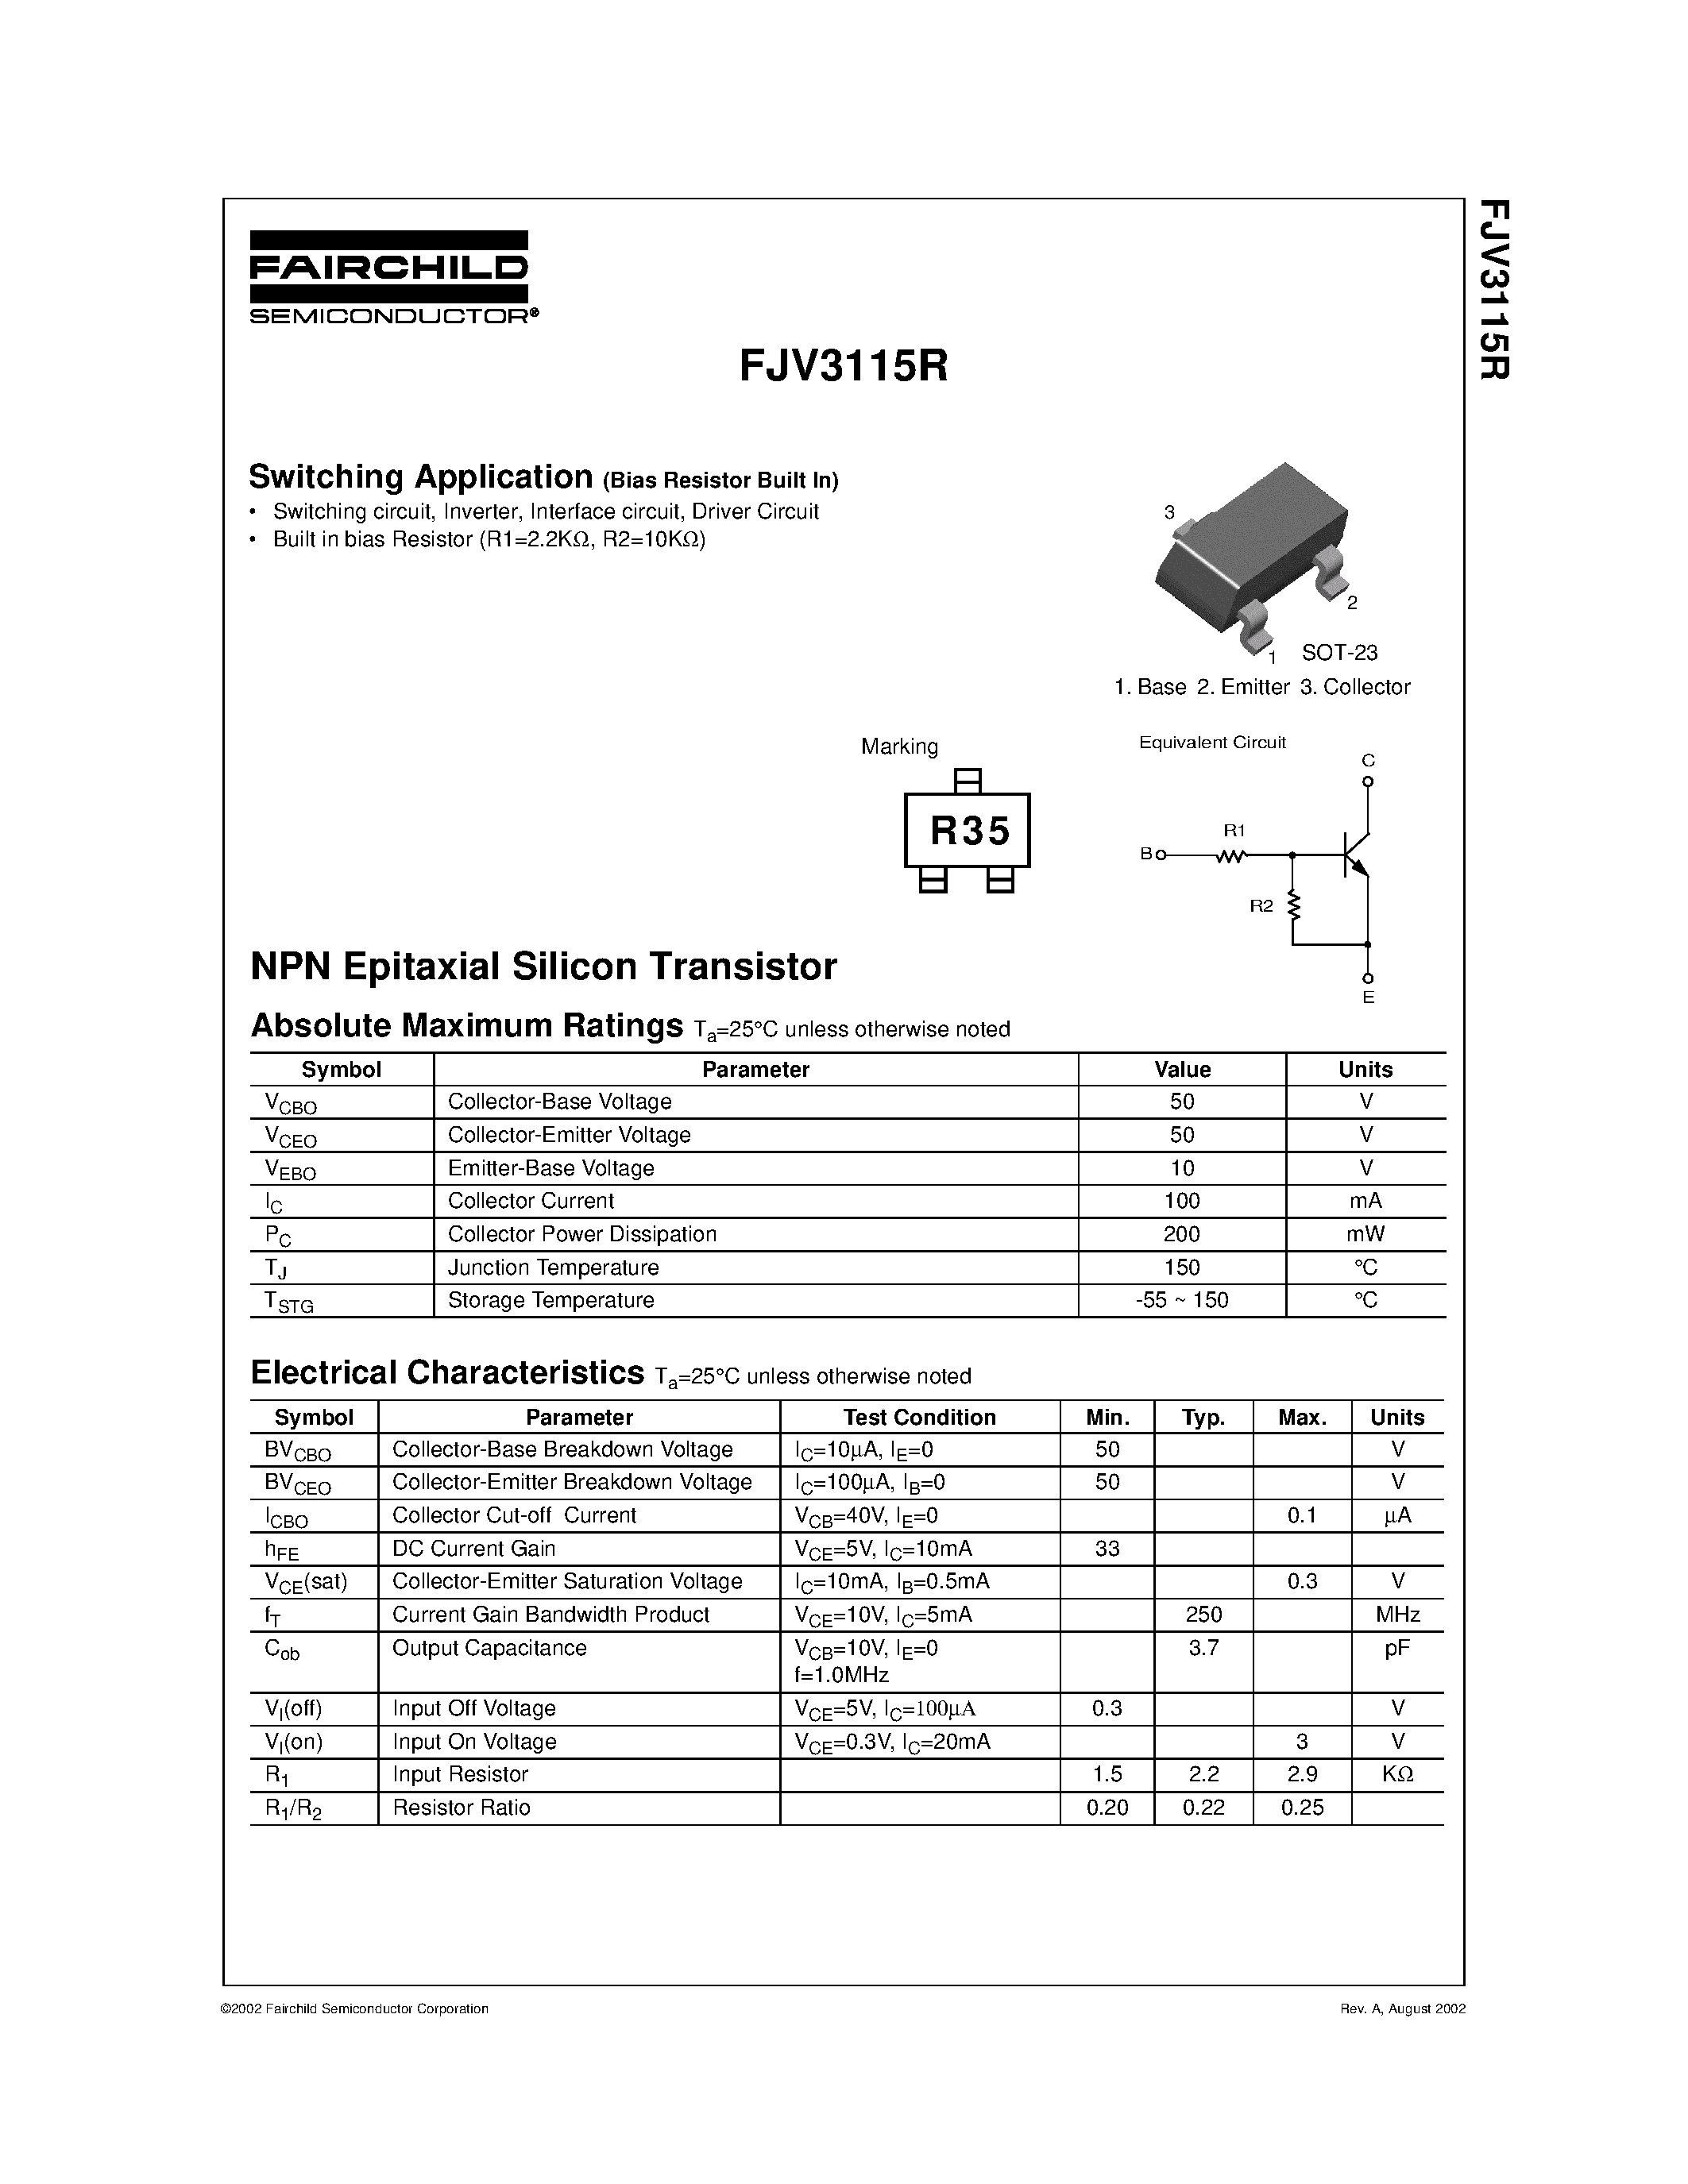 Datasheet FJV3115R - NPN Epitaxial Silicon Transistor page 1